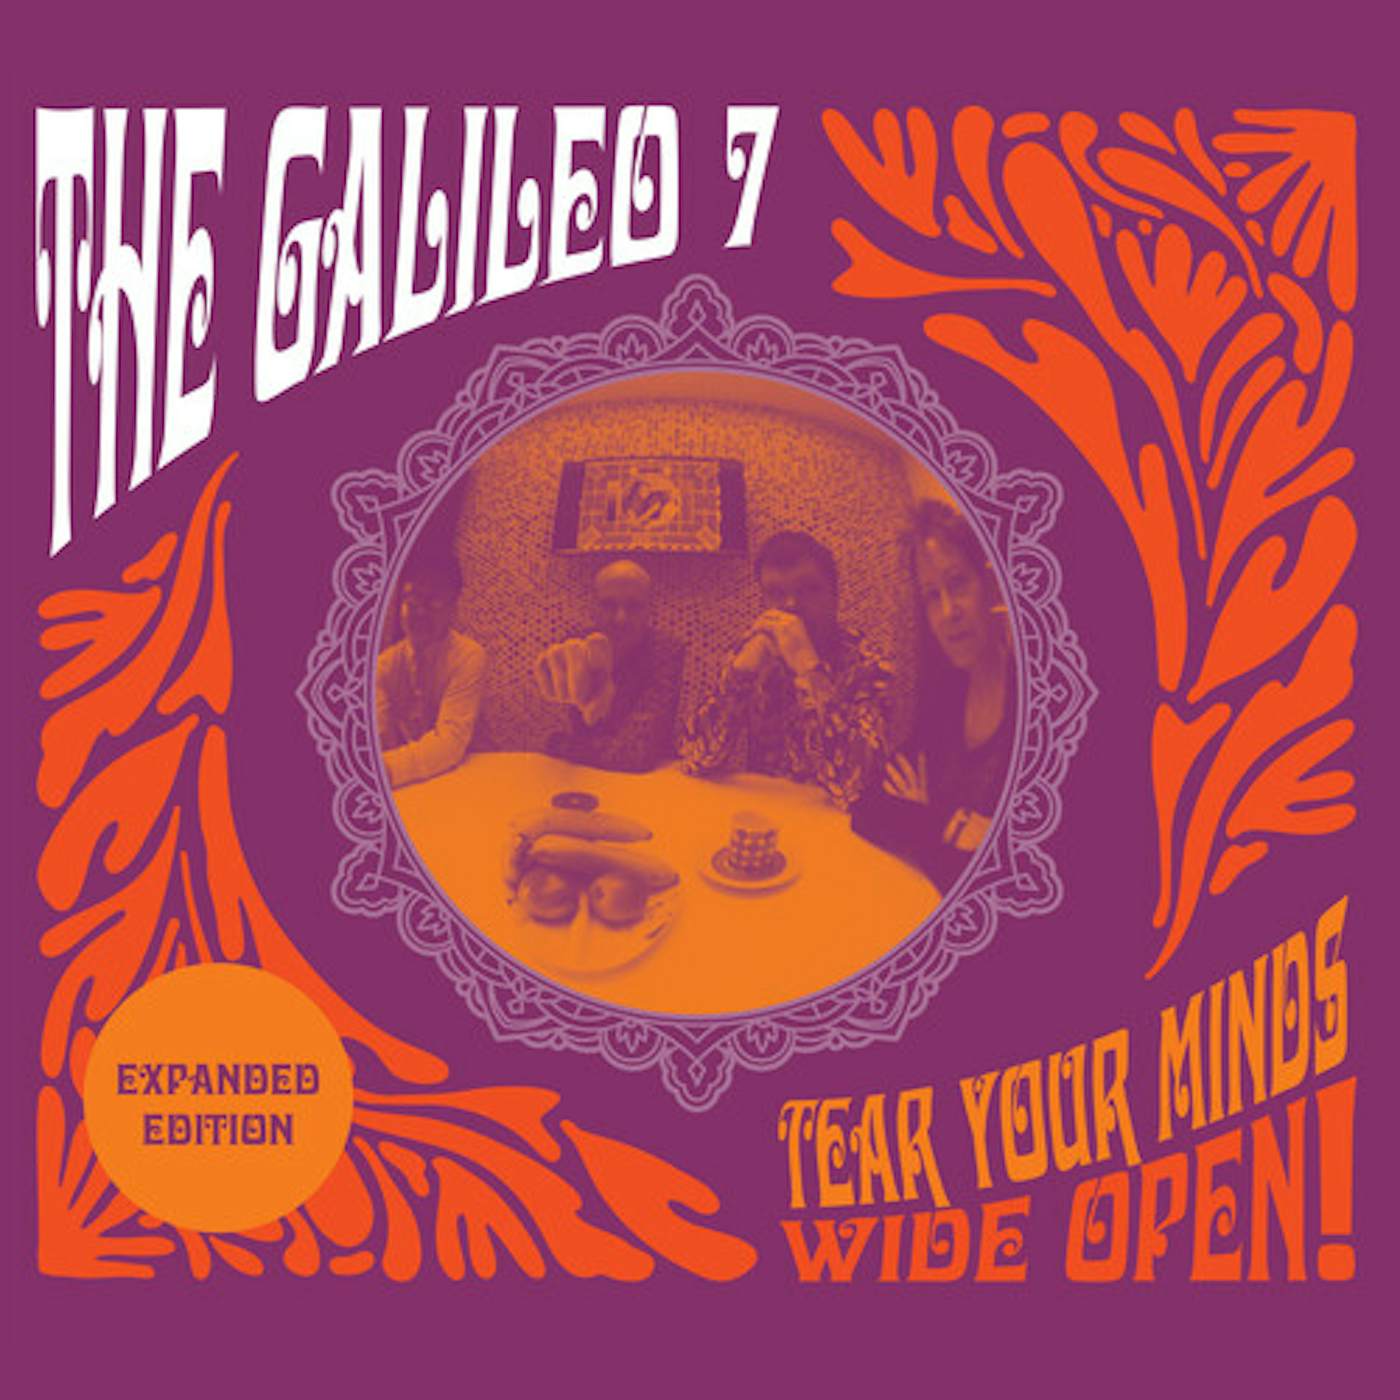 The Galileo 7 TEAR YOUR MINDS WIDE OPEN! CD